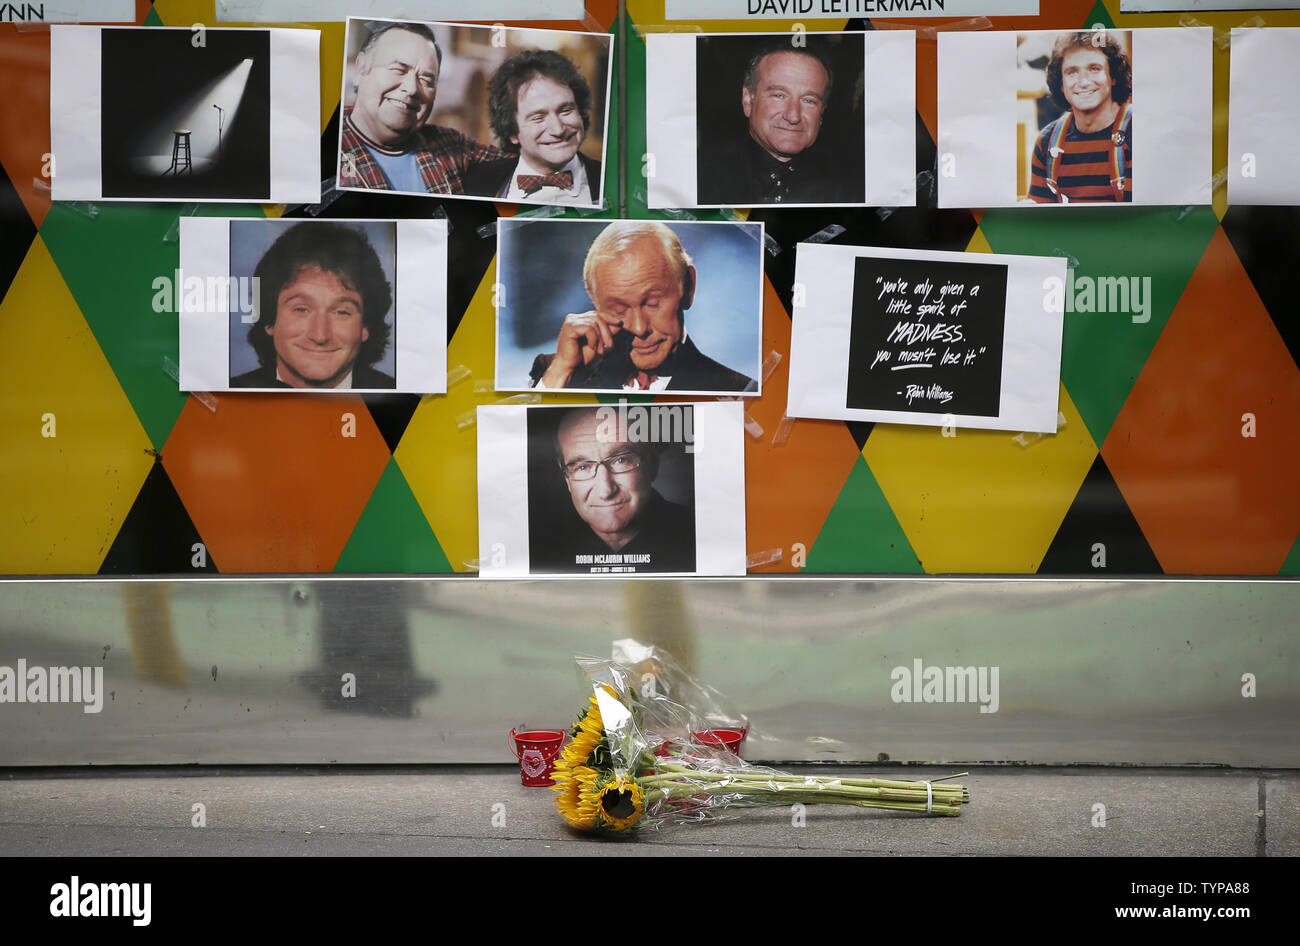 A tribute and memorial containing flowers, cards, candles and pictures of the late Robin Williams are placed at the entrance to Carolines on Broadway comedy club in New York City on August 12, 2014. Robin Williams committed suicide by hanging himself with a belt, the coroner said Tuesday in a press conference detailing the preliminary findings surrounding the actor and comedian's death.          UPI/John Angelillo Stock Photo